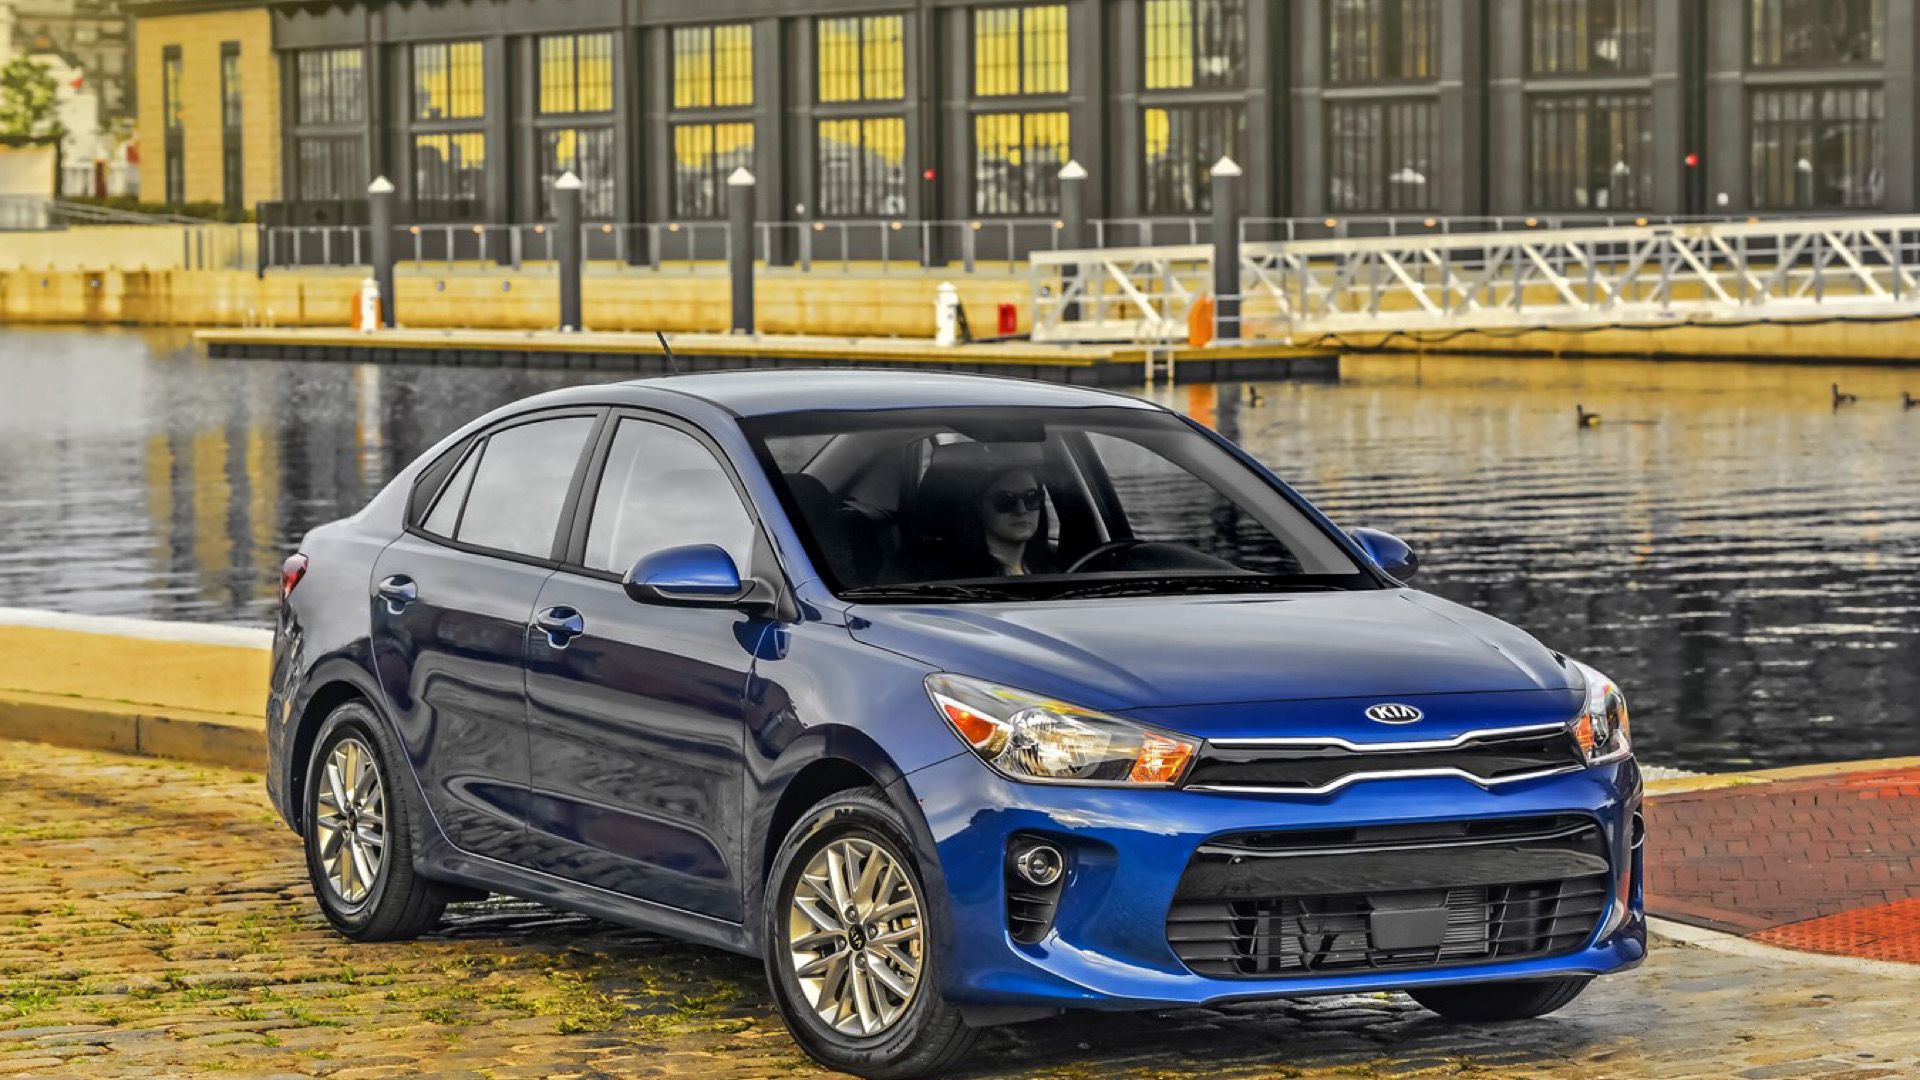 2019 Kia Rio in blue Posing in front of harbour